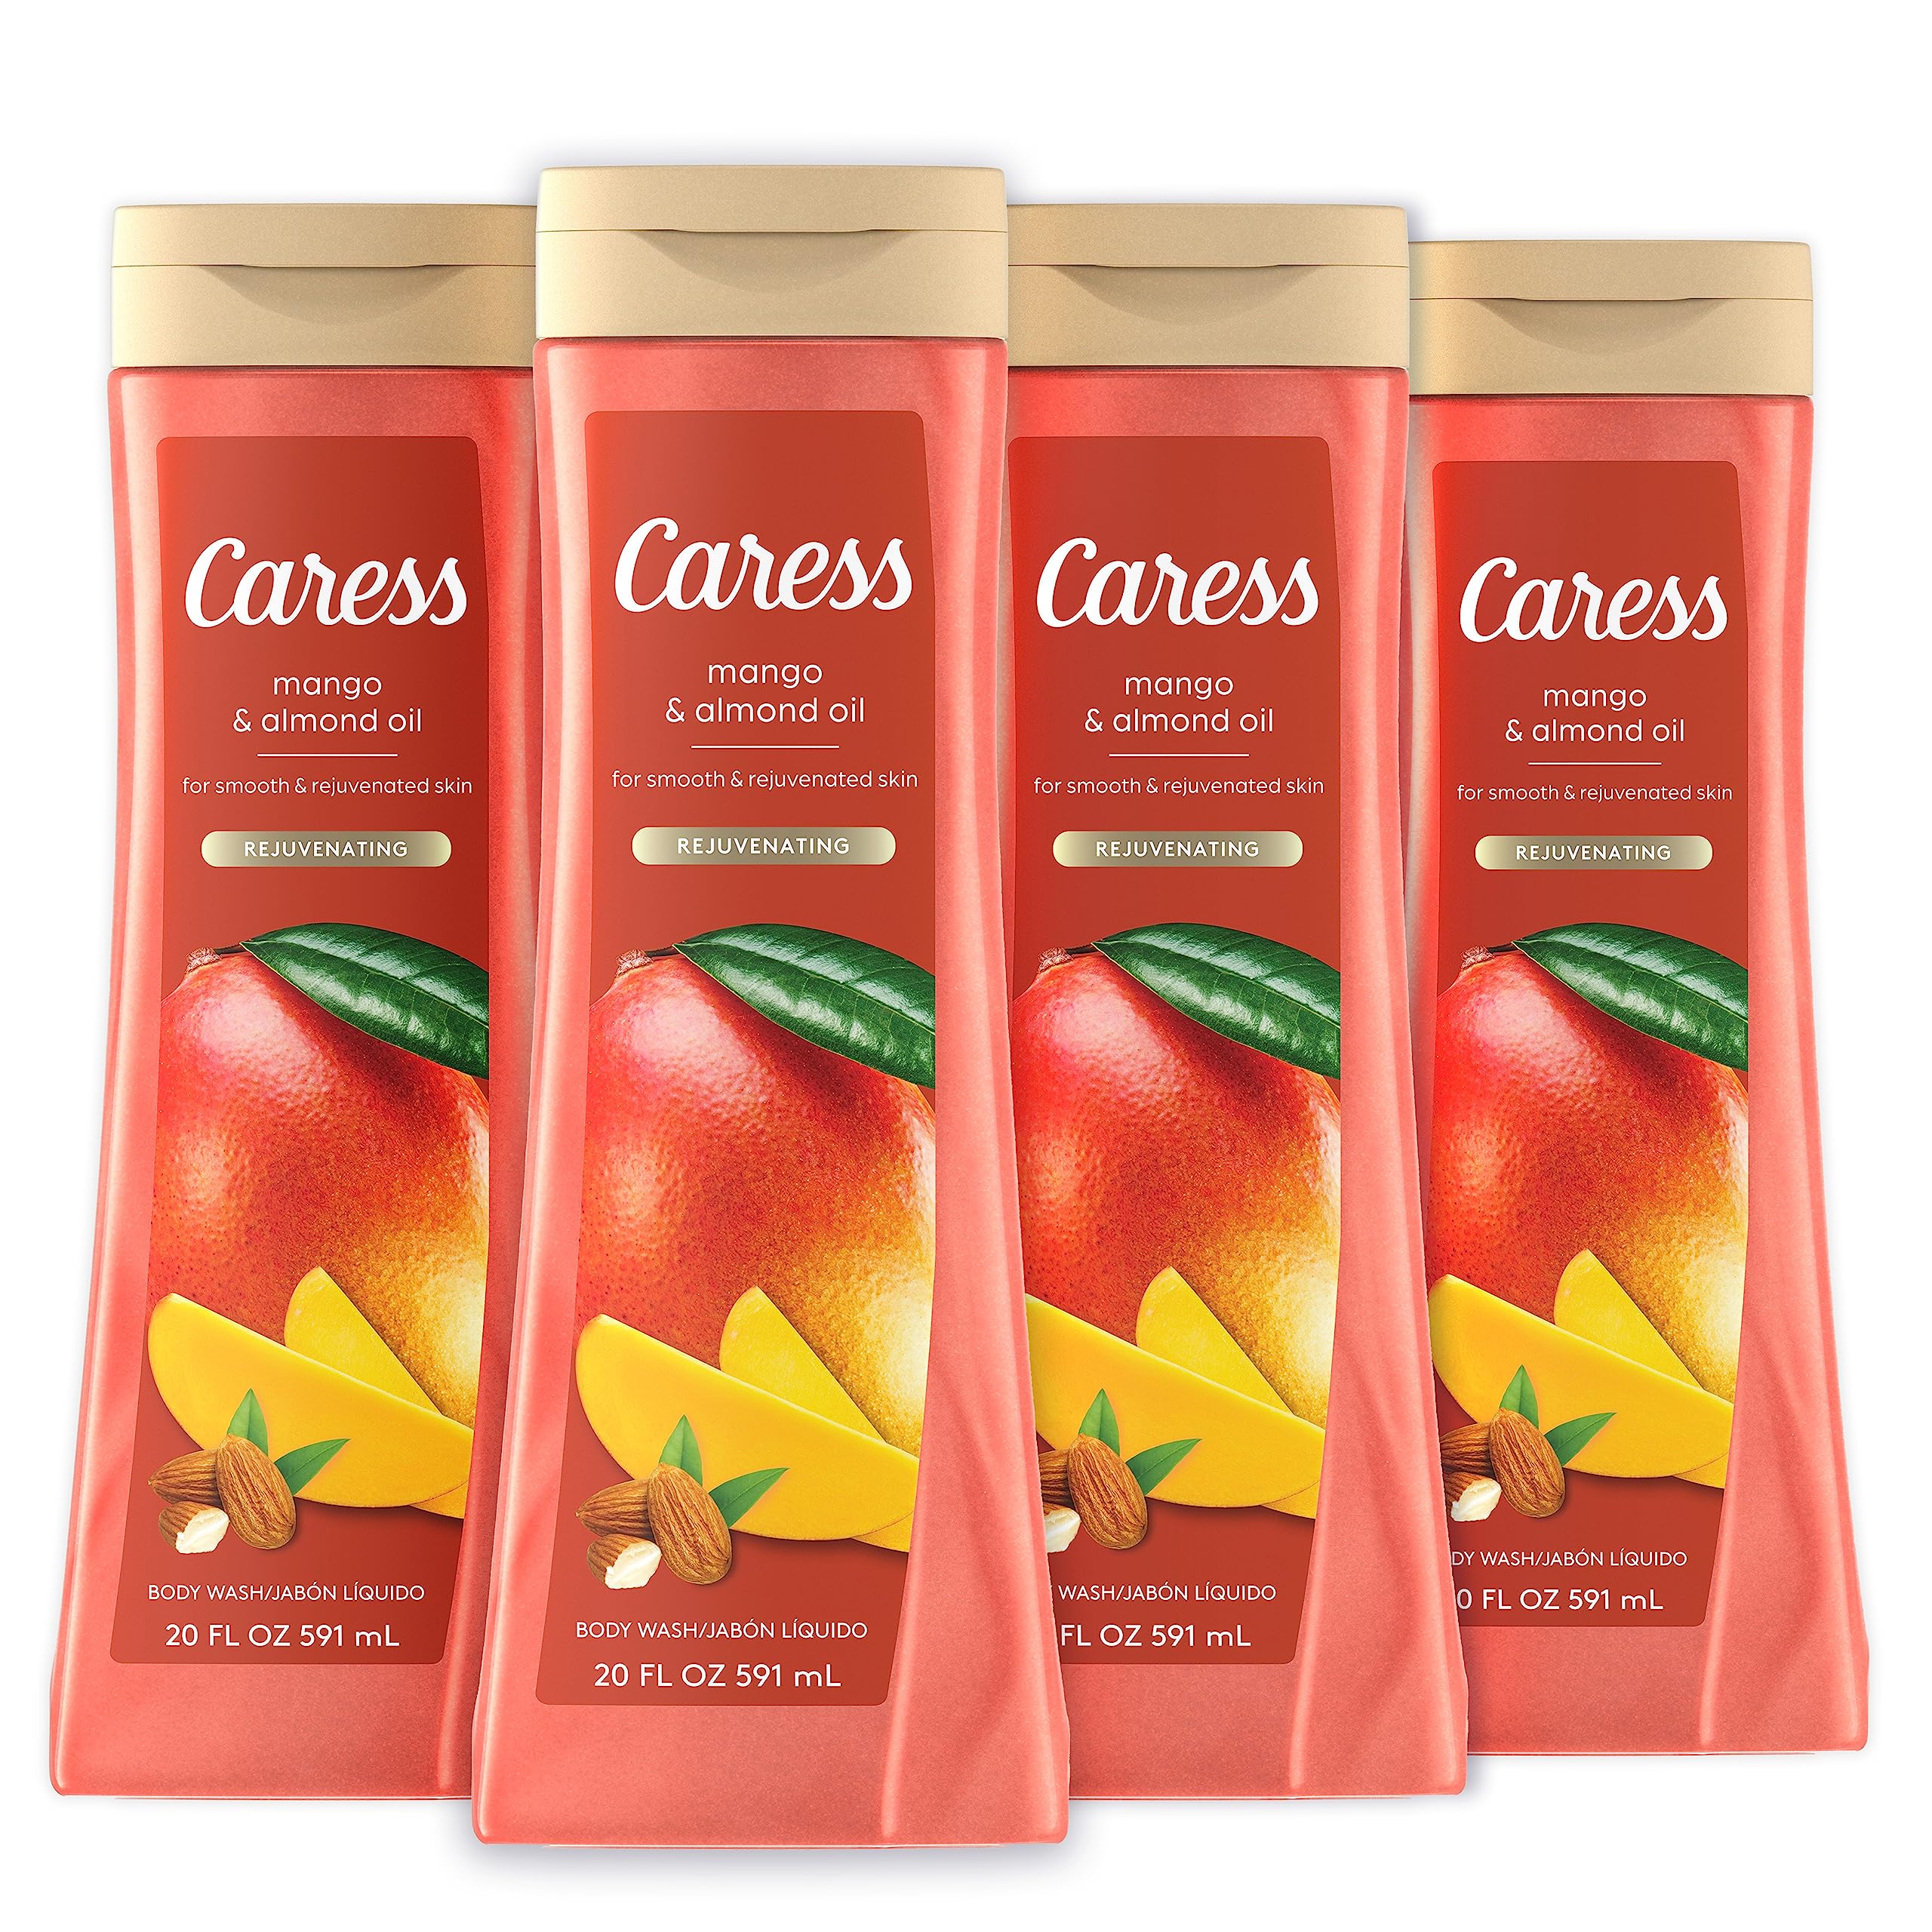 Caress Body Wash Mango & Almond Oil For Smooth And Rejuvenated Skin Body Soap 20 fl oz, Pack of 4